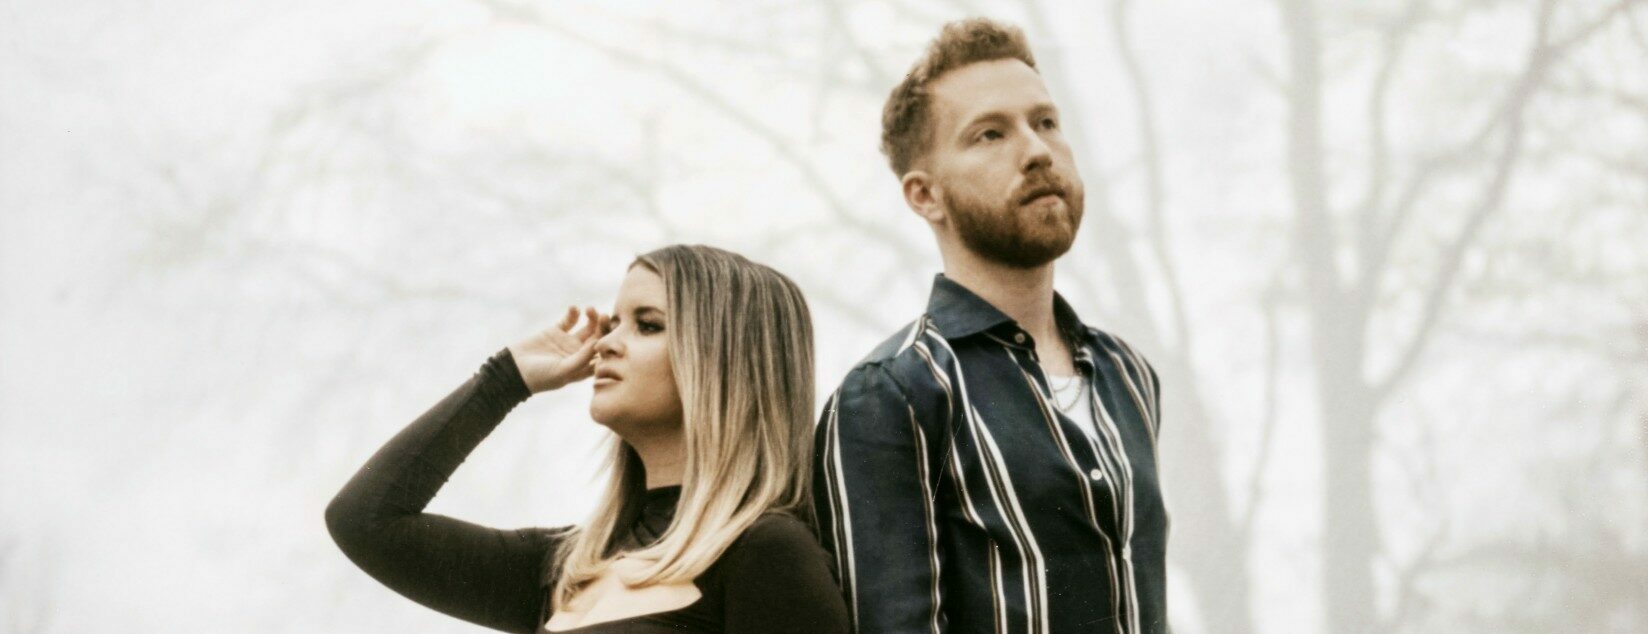 JP Saxe & Maren Morris Collaborate “Line by Line” on a Timeless Love Song